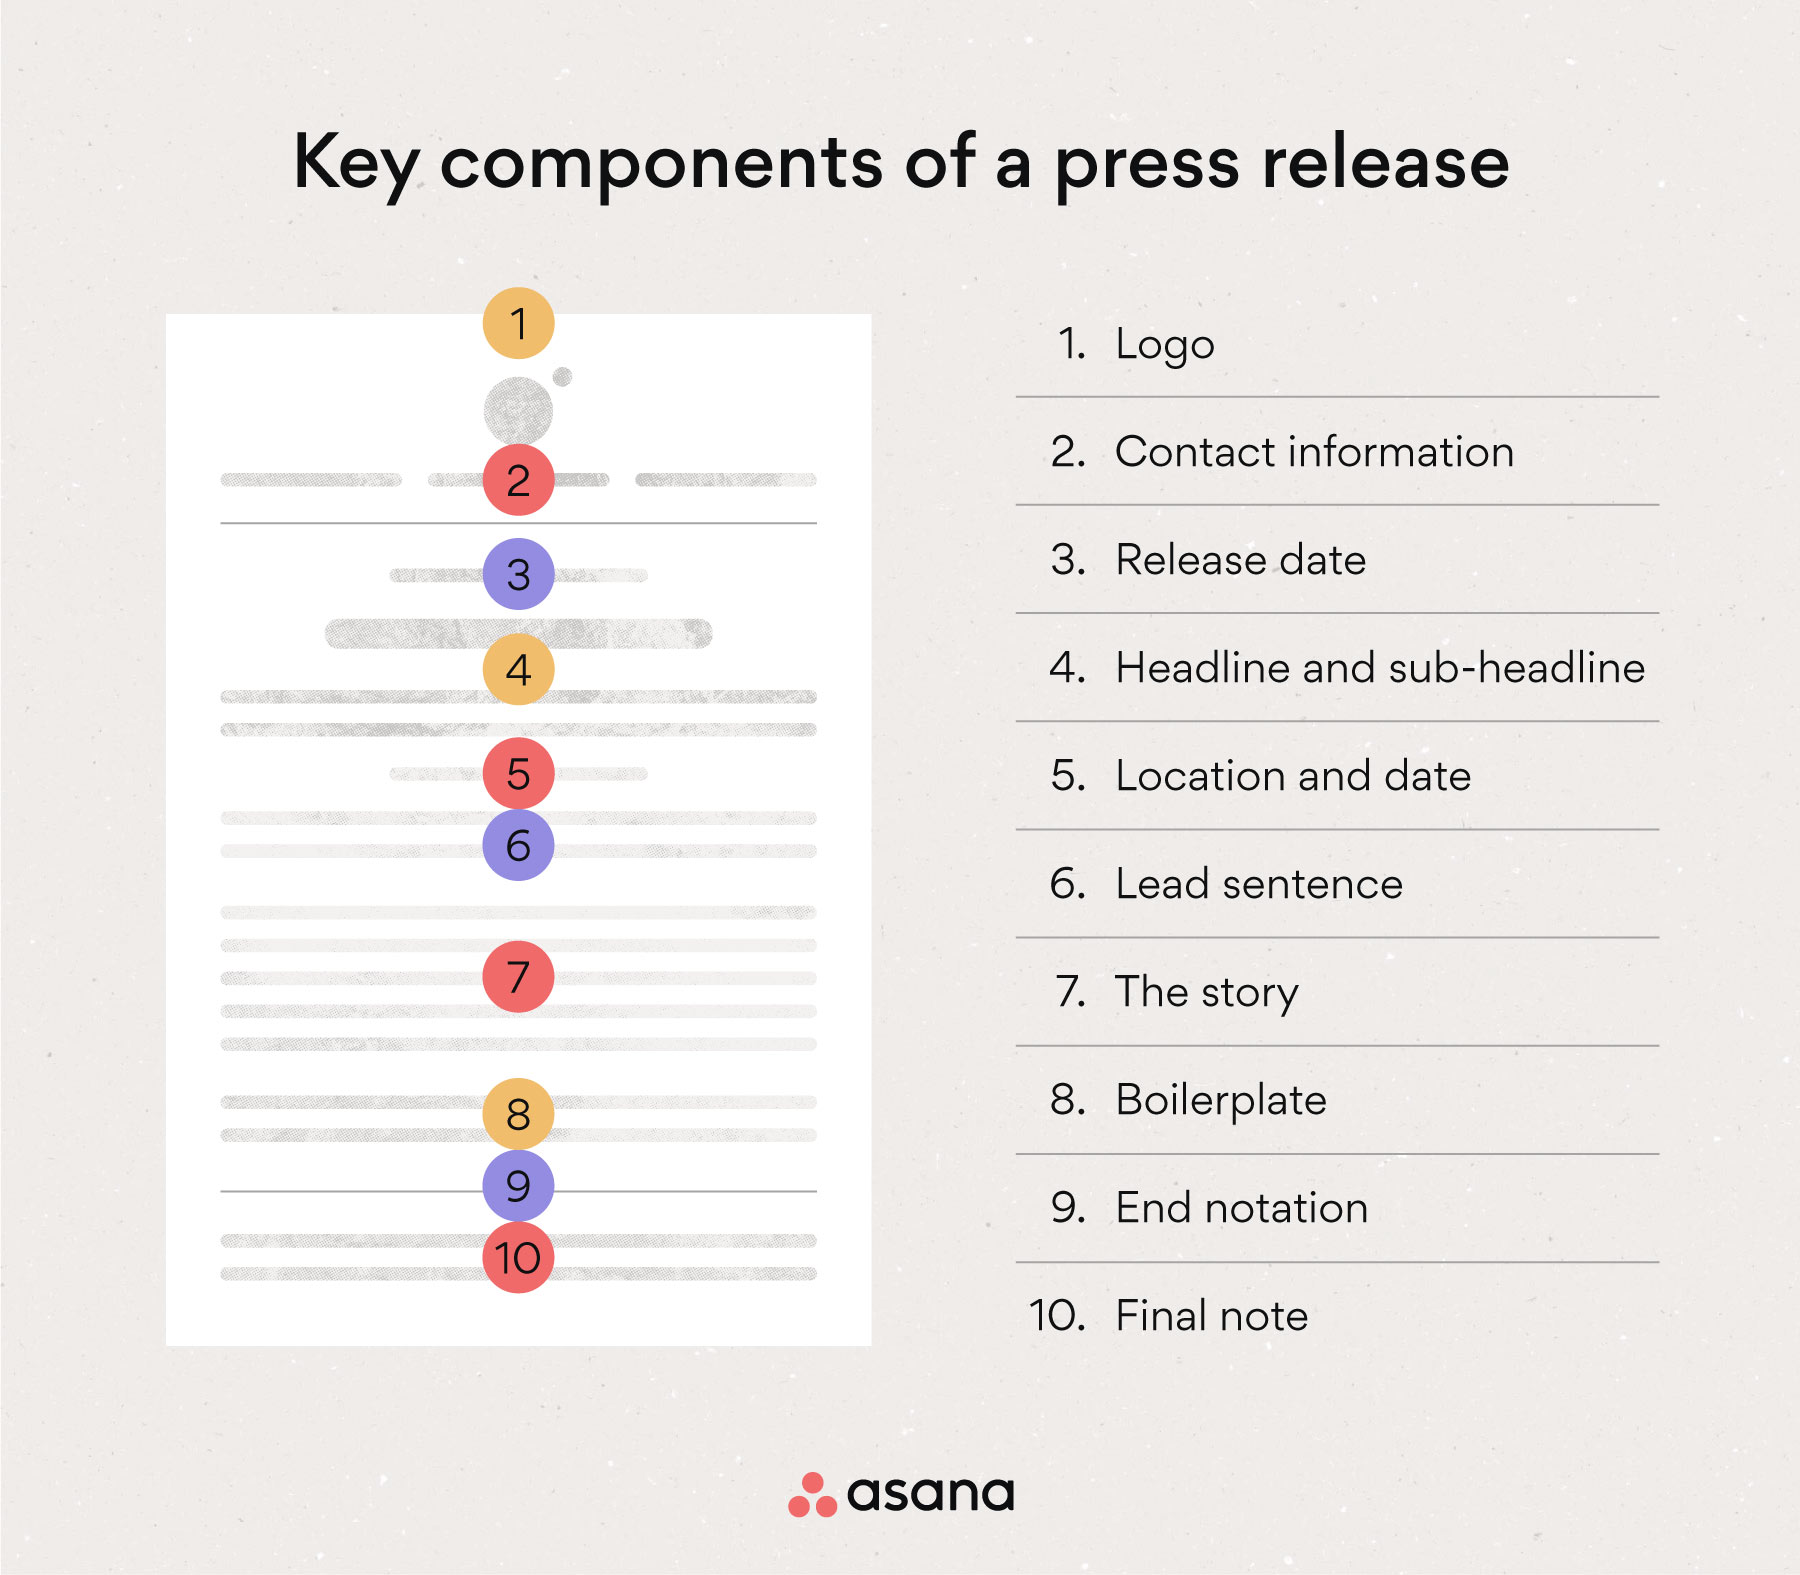 10 key components of a press release